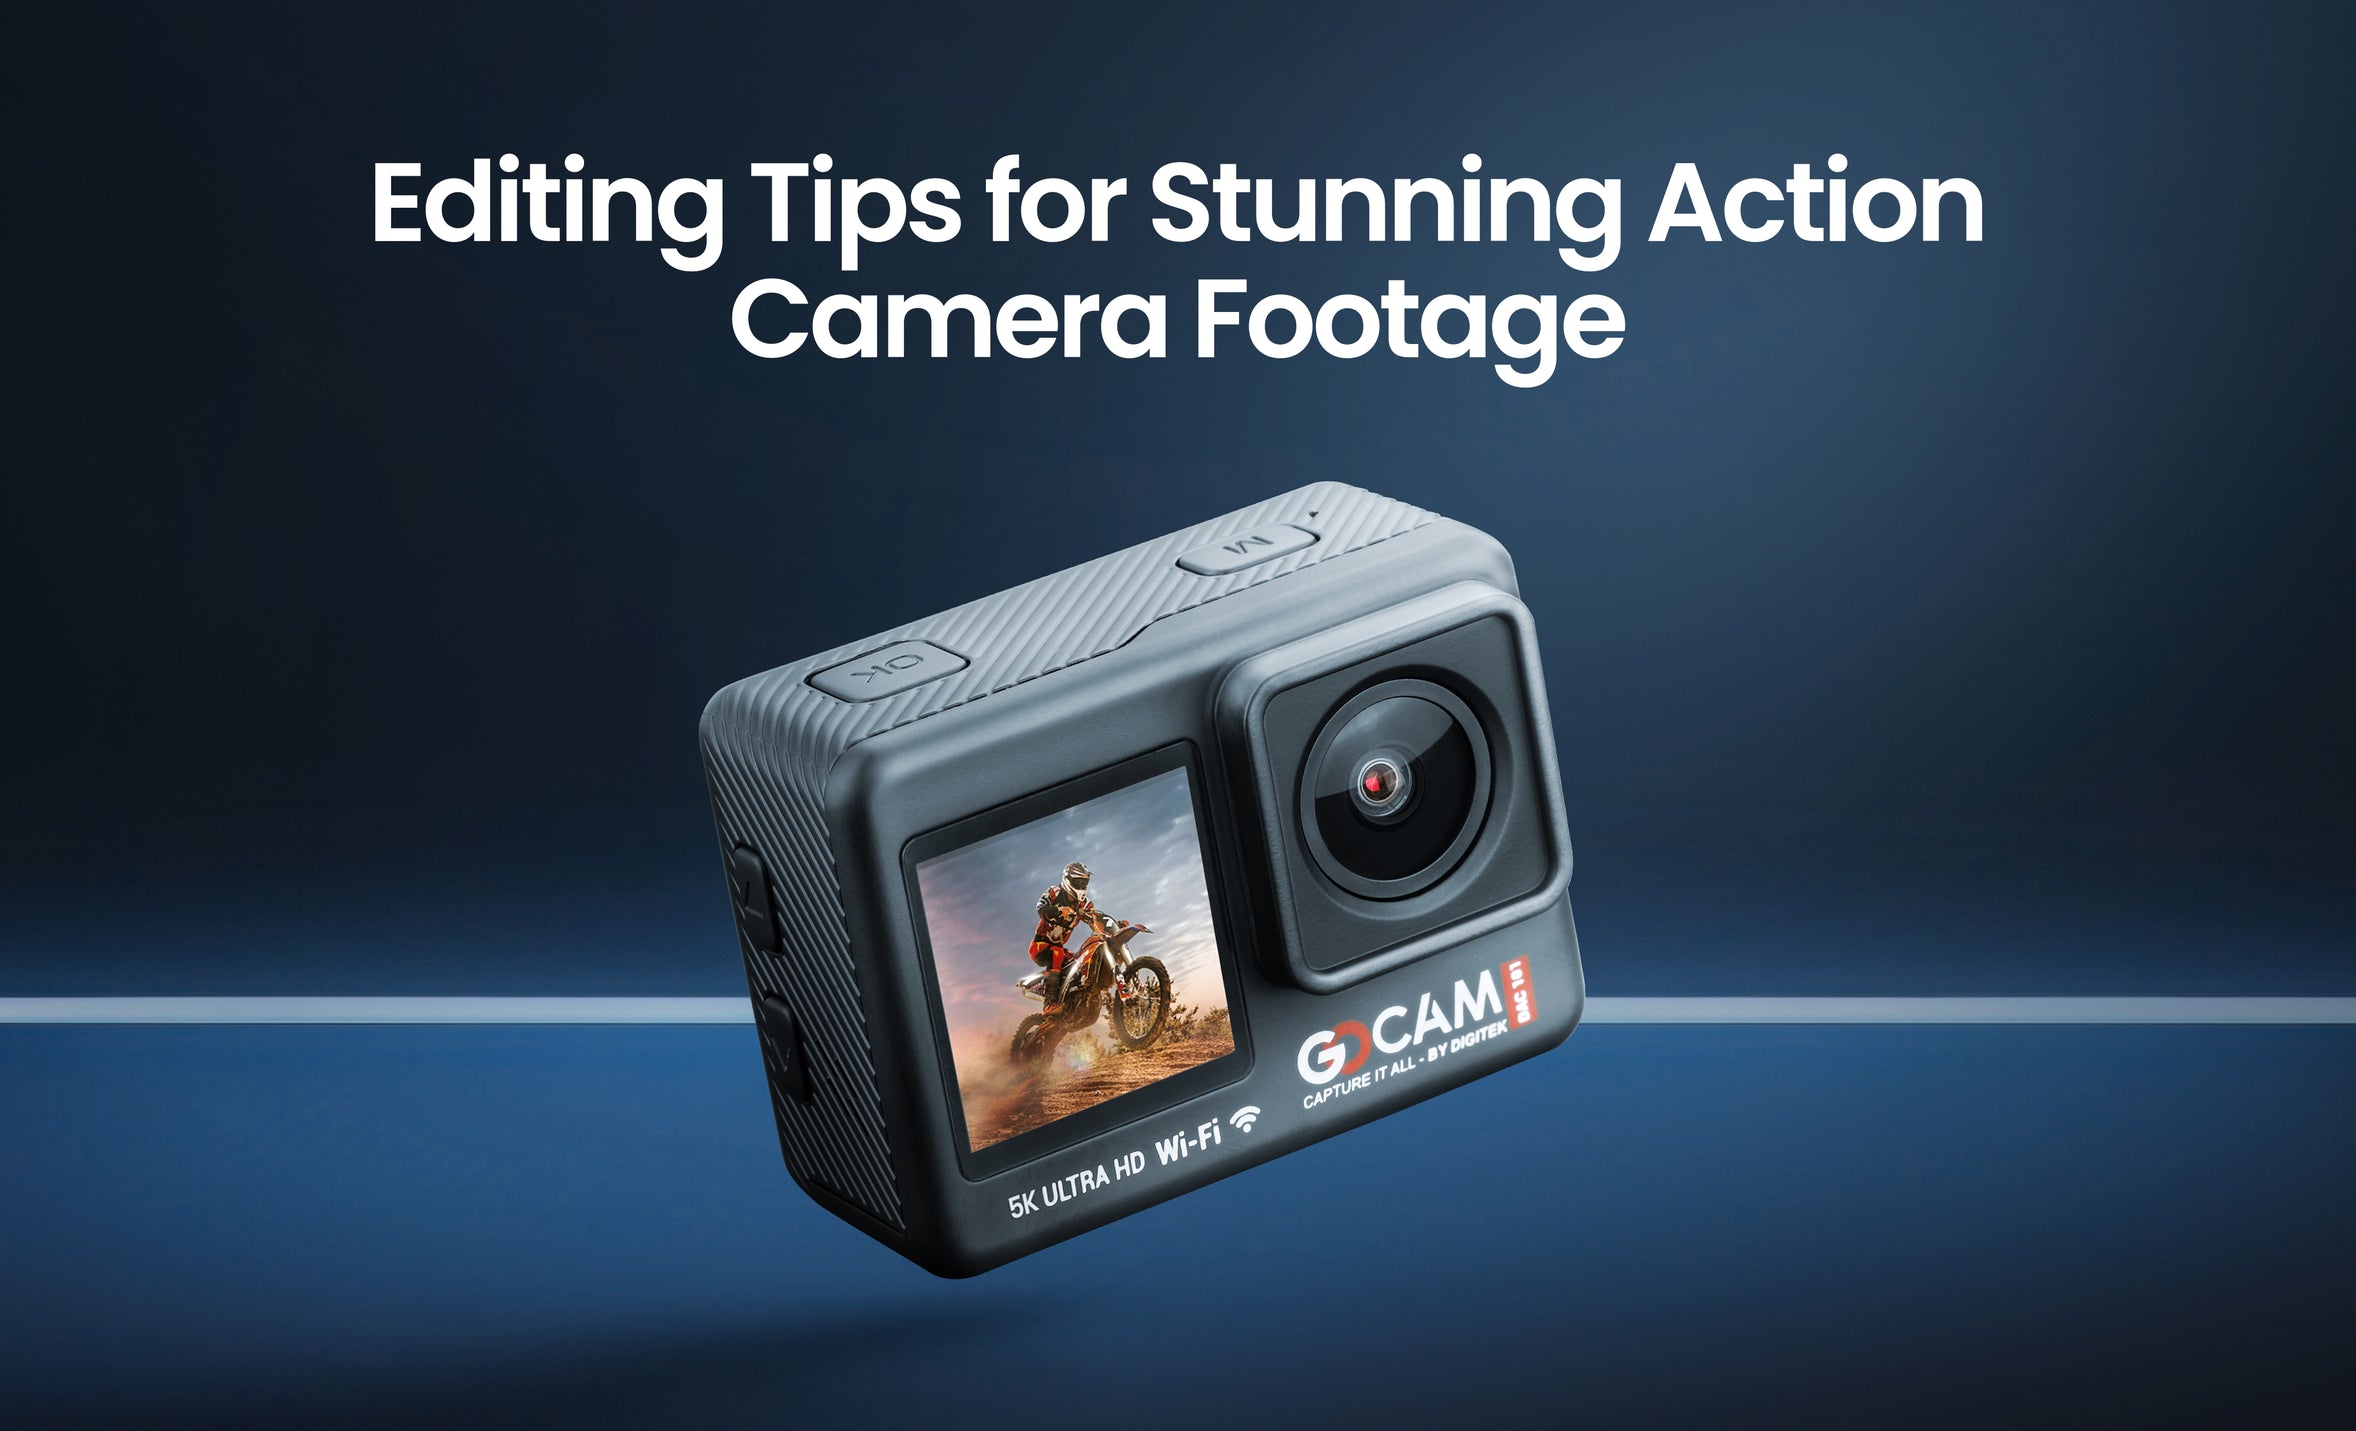 Editing Tips for Stunning Action Camera Footage